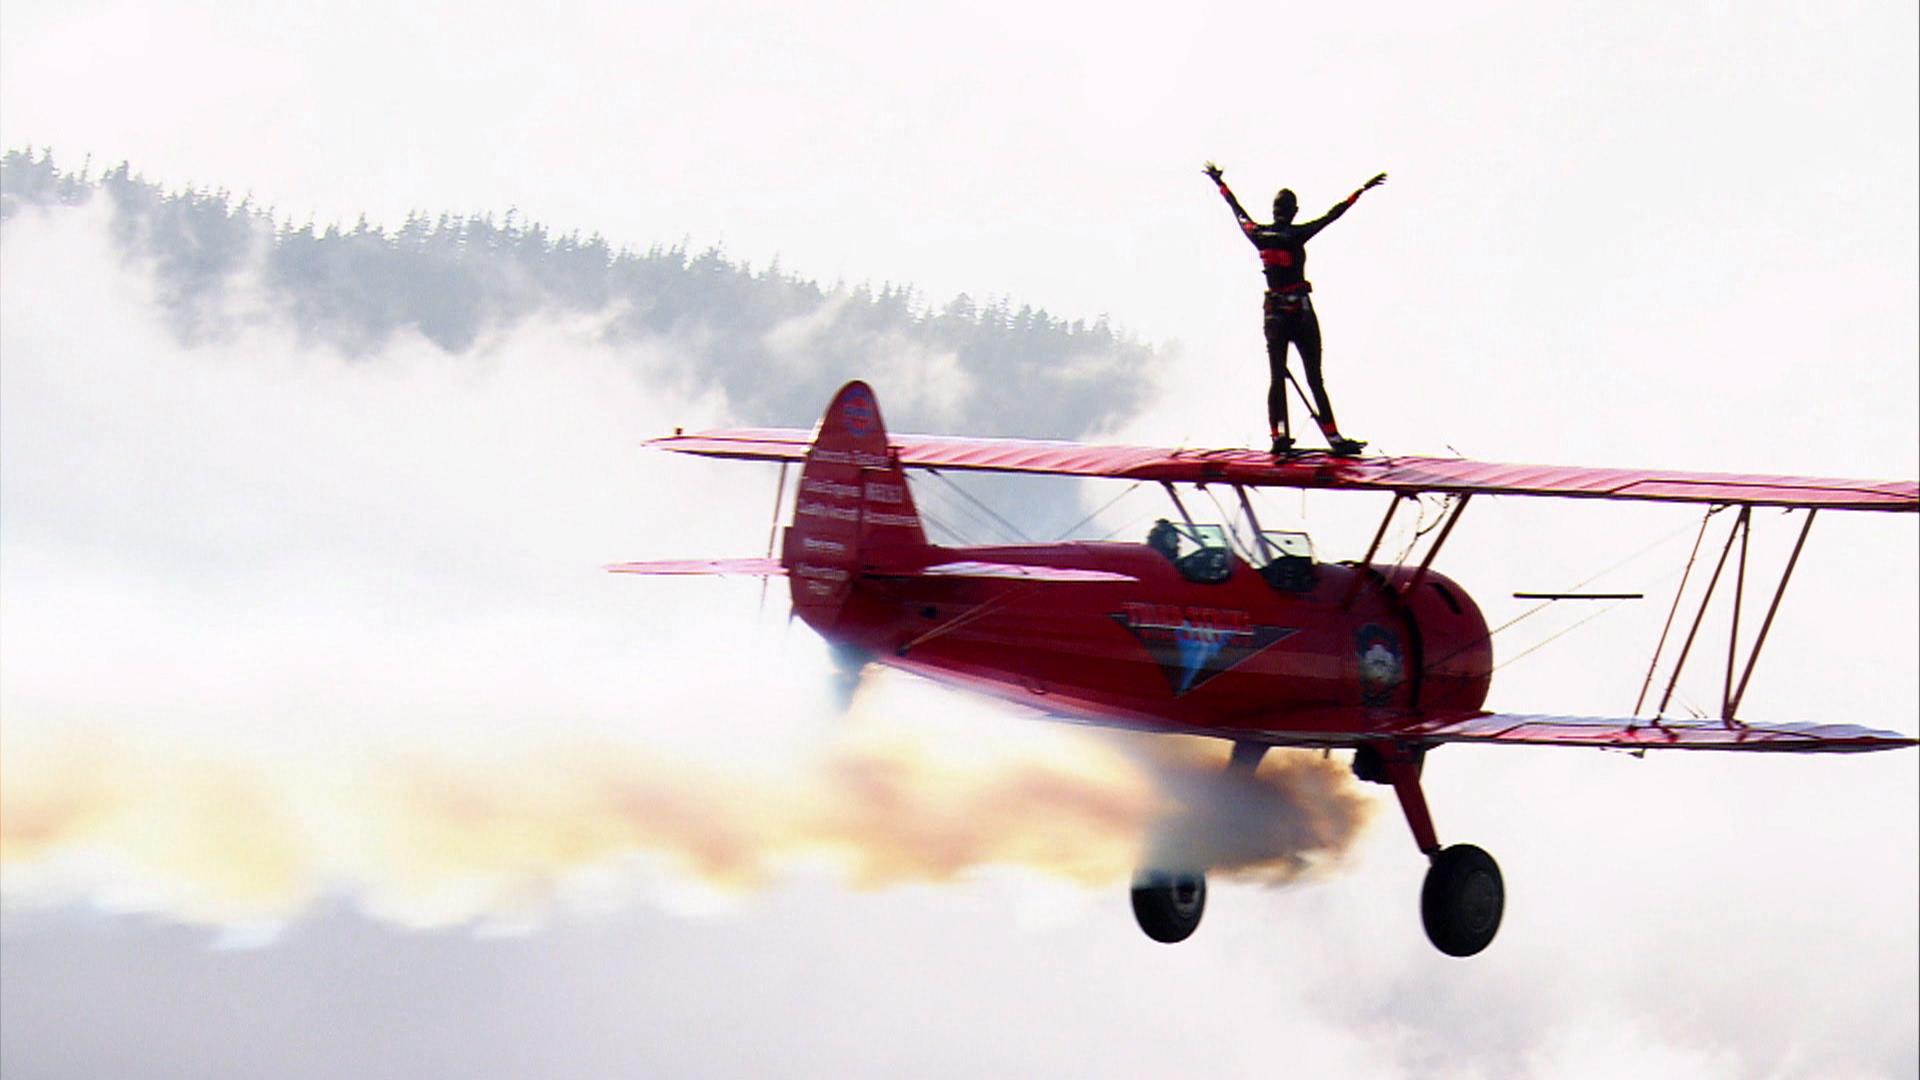 Meet one of the last remaining wing walkers.